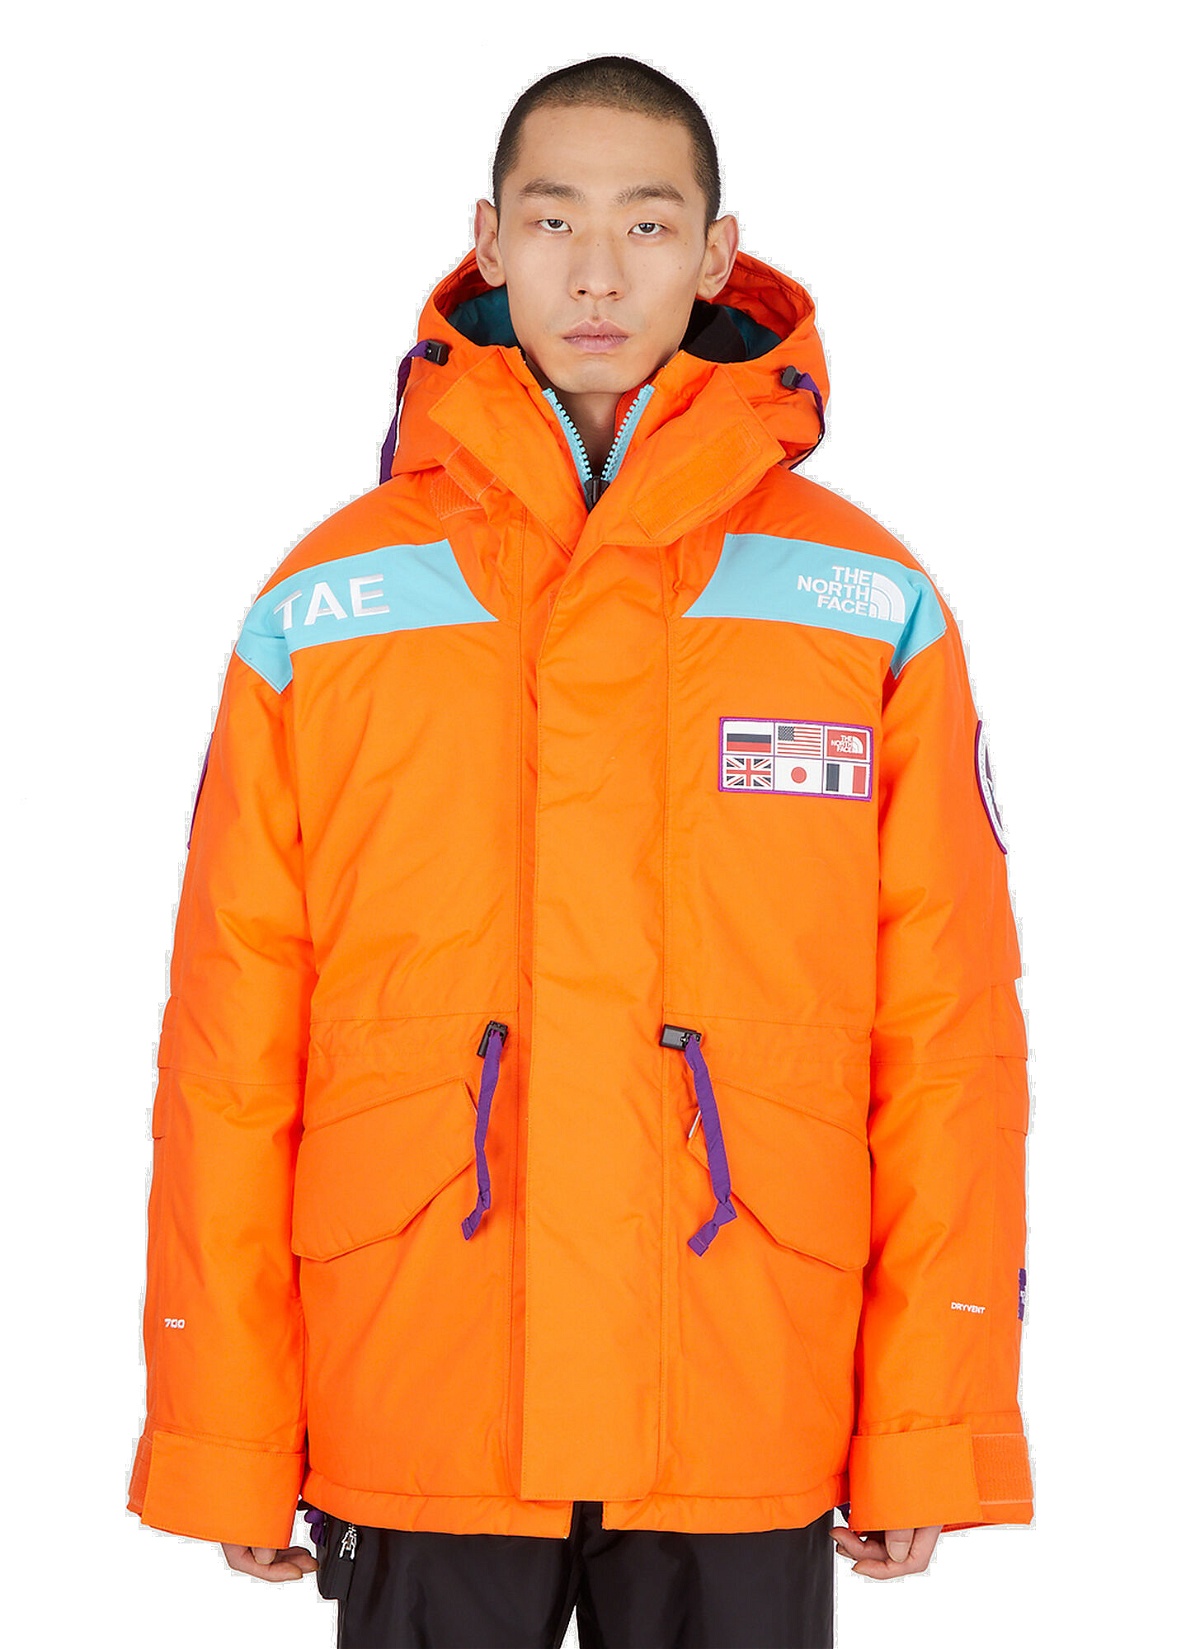 Trans Antarctica Expedition Jacket in The North Orange Face